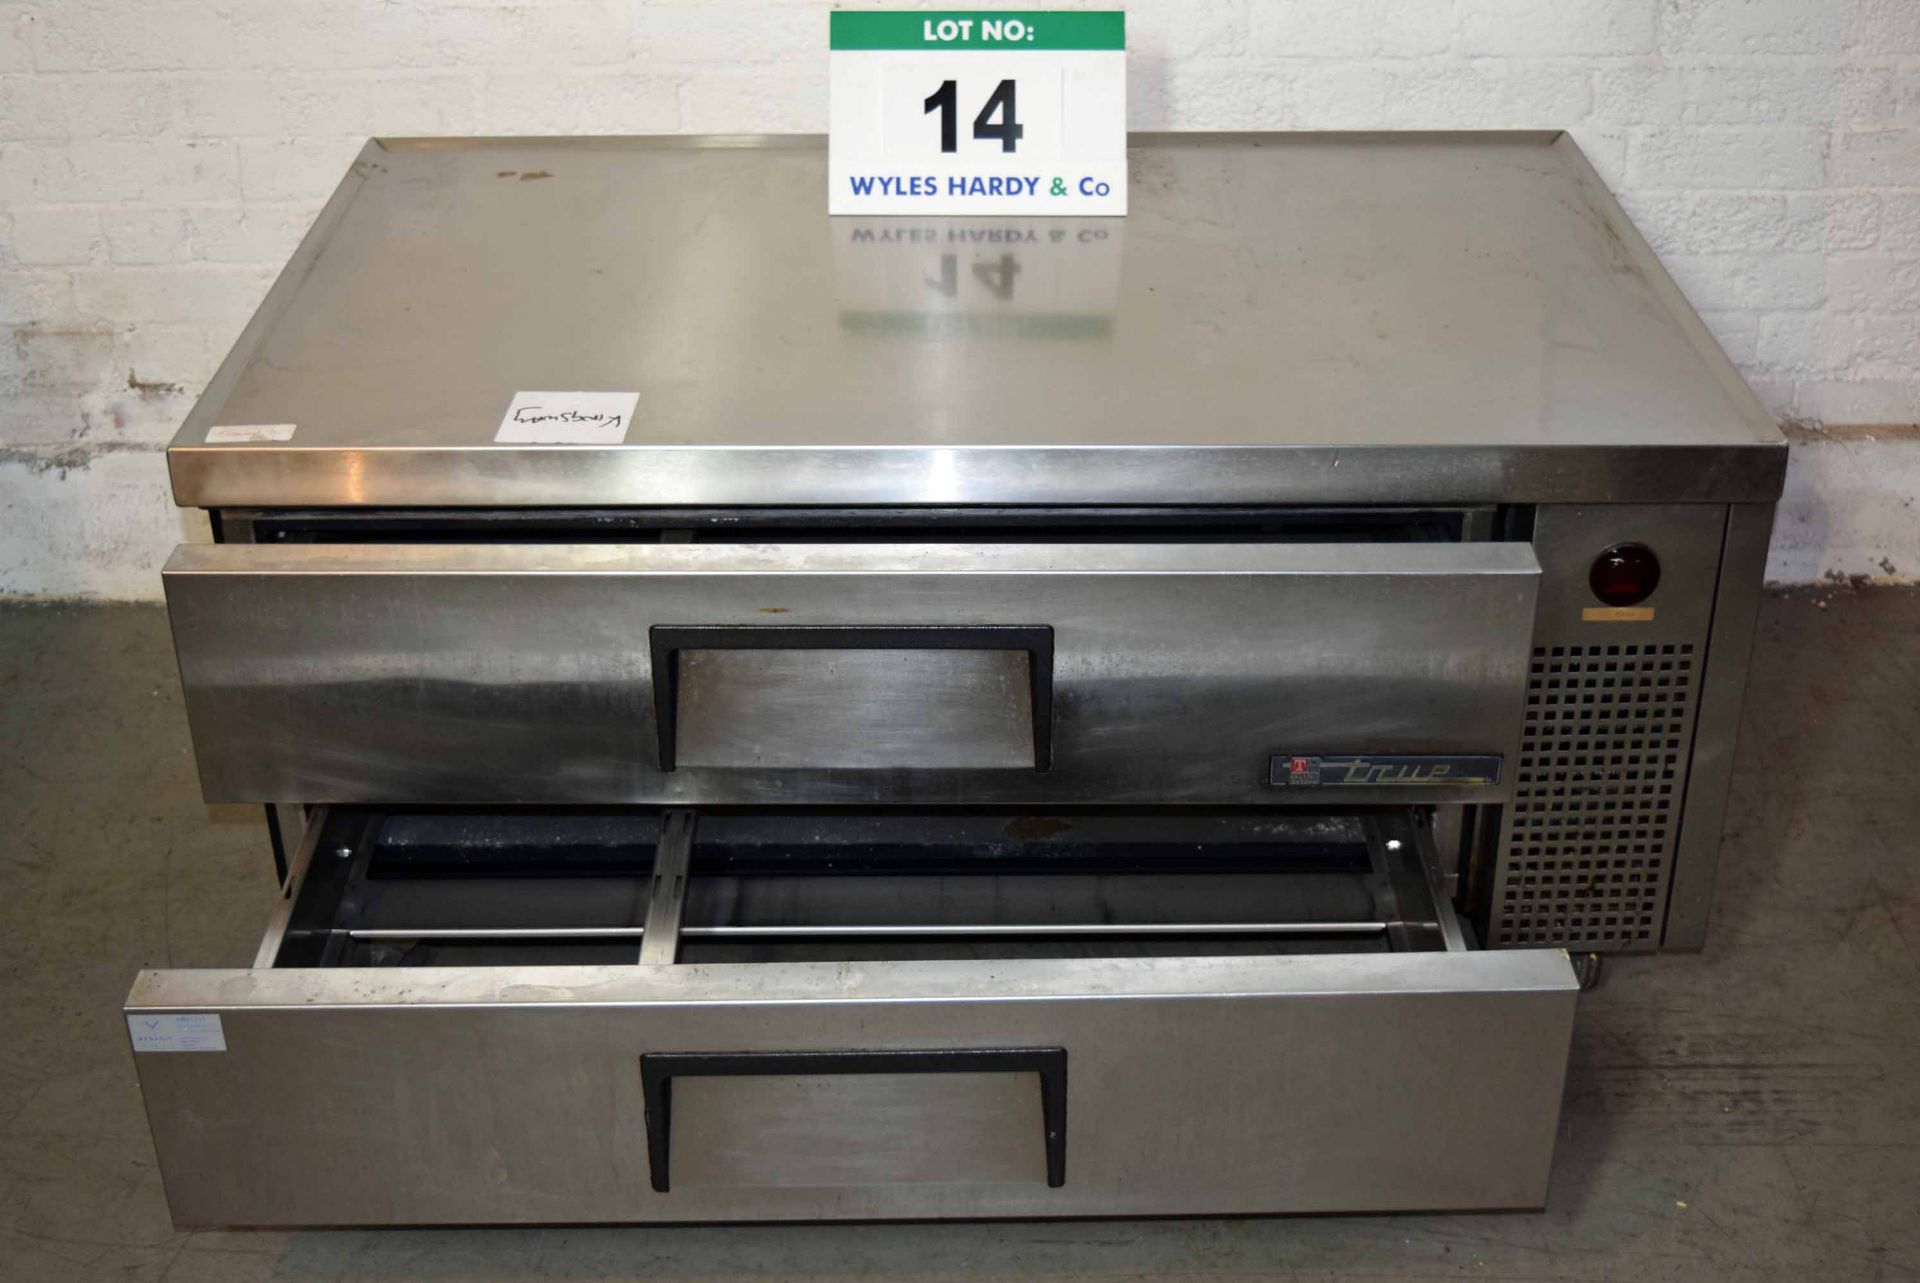 A TRUE 1.3M Stainless Steel Single Phase Chef Station Hot Cupboard (As Photographed)